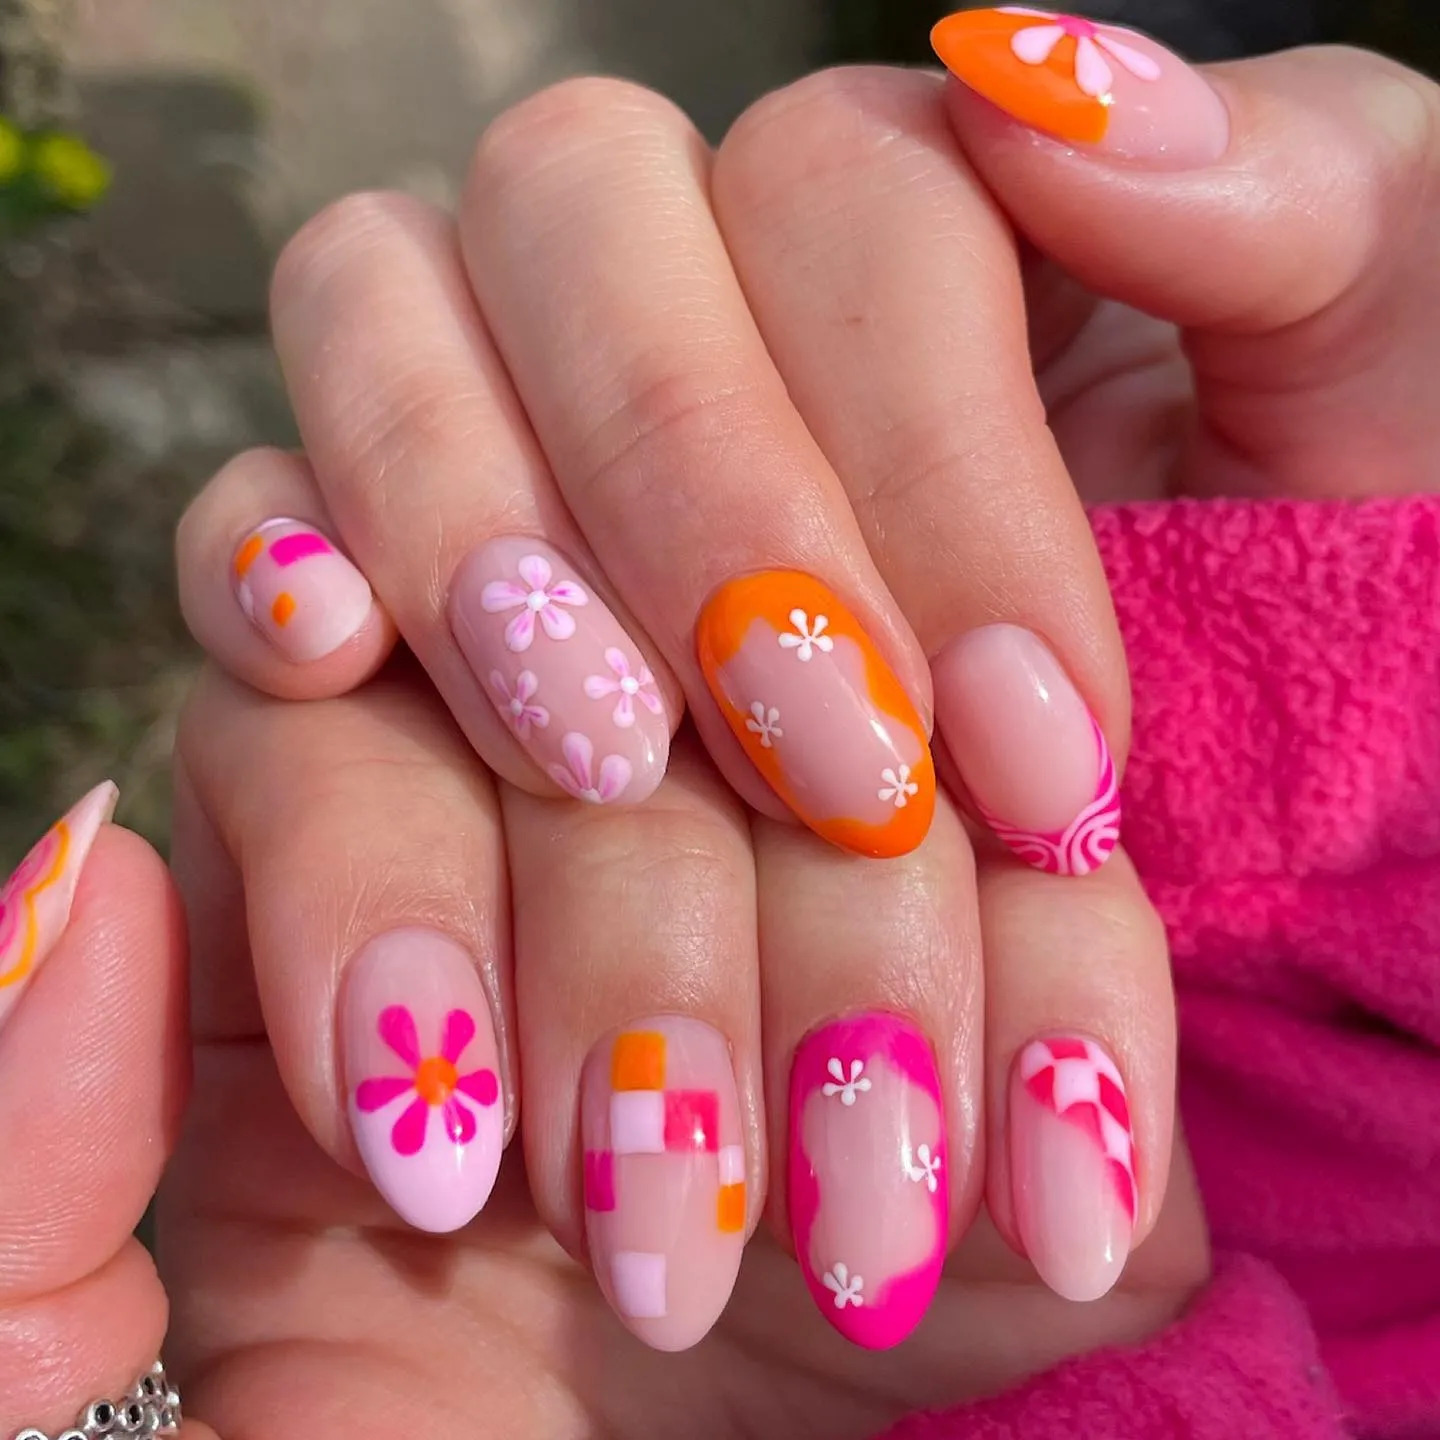 40 Summer Nail Art Designs We've Bookmarked - Beauty Bay Edited